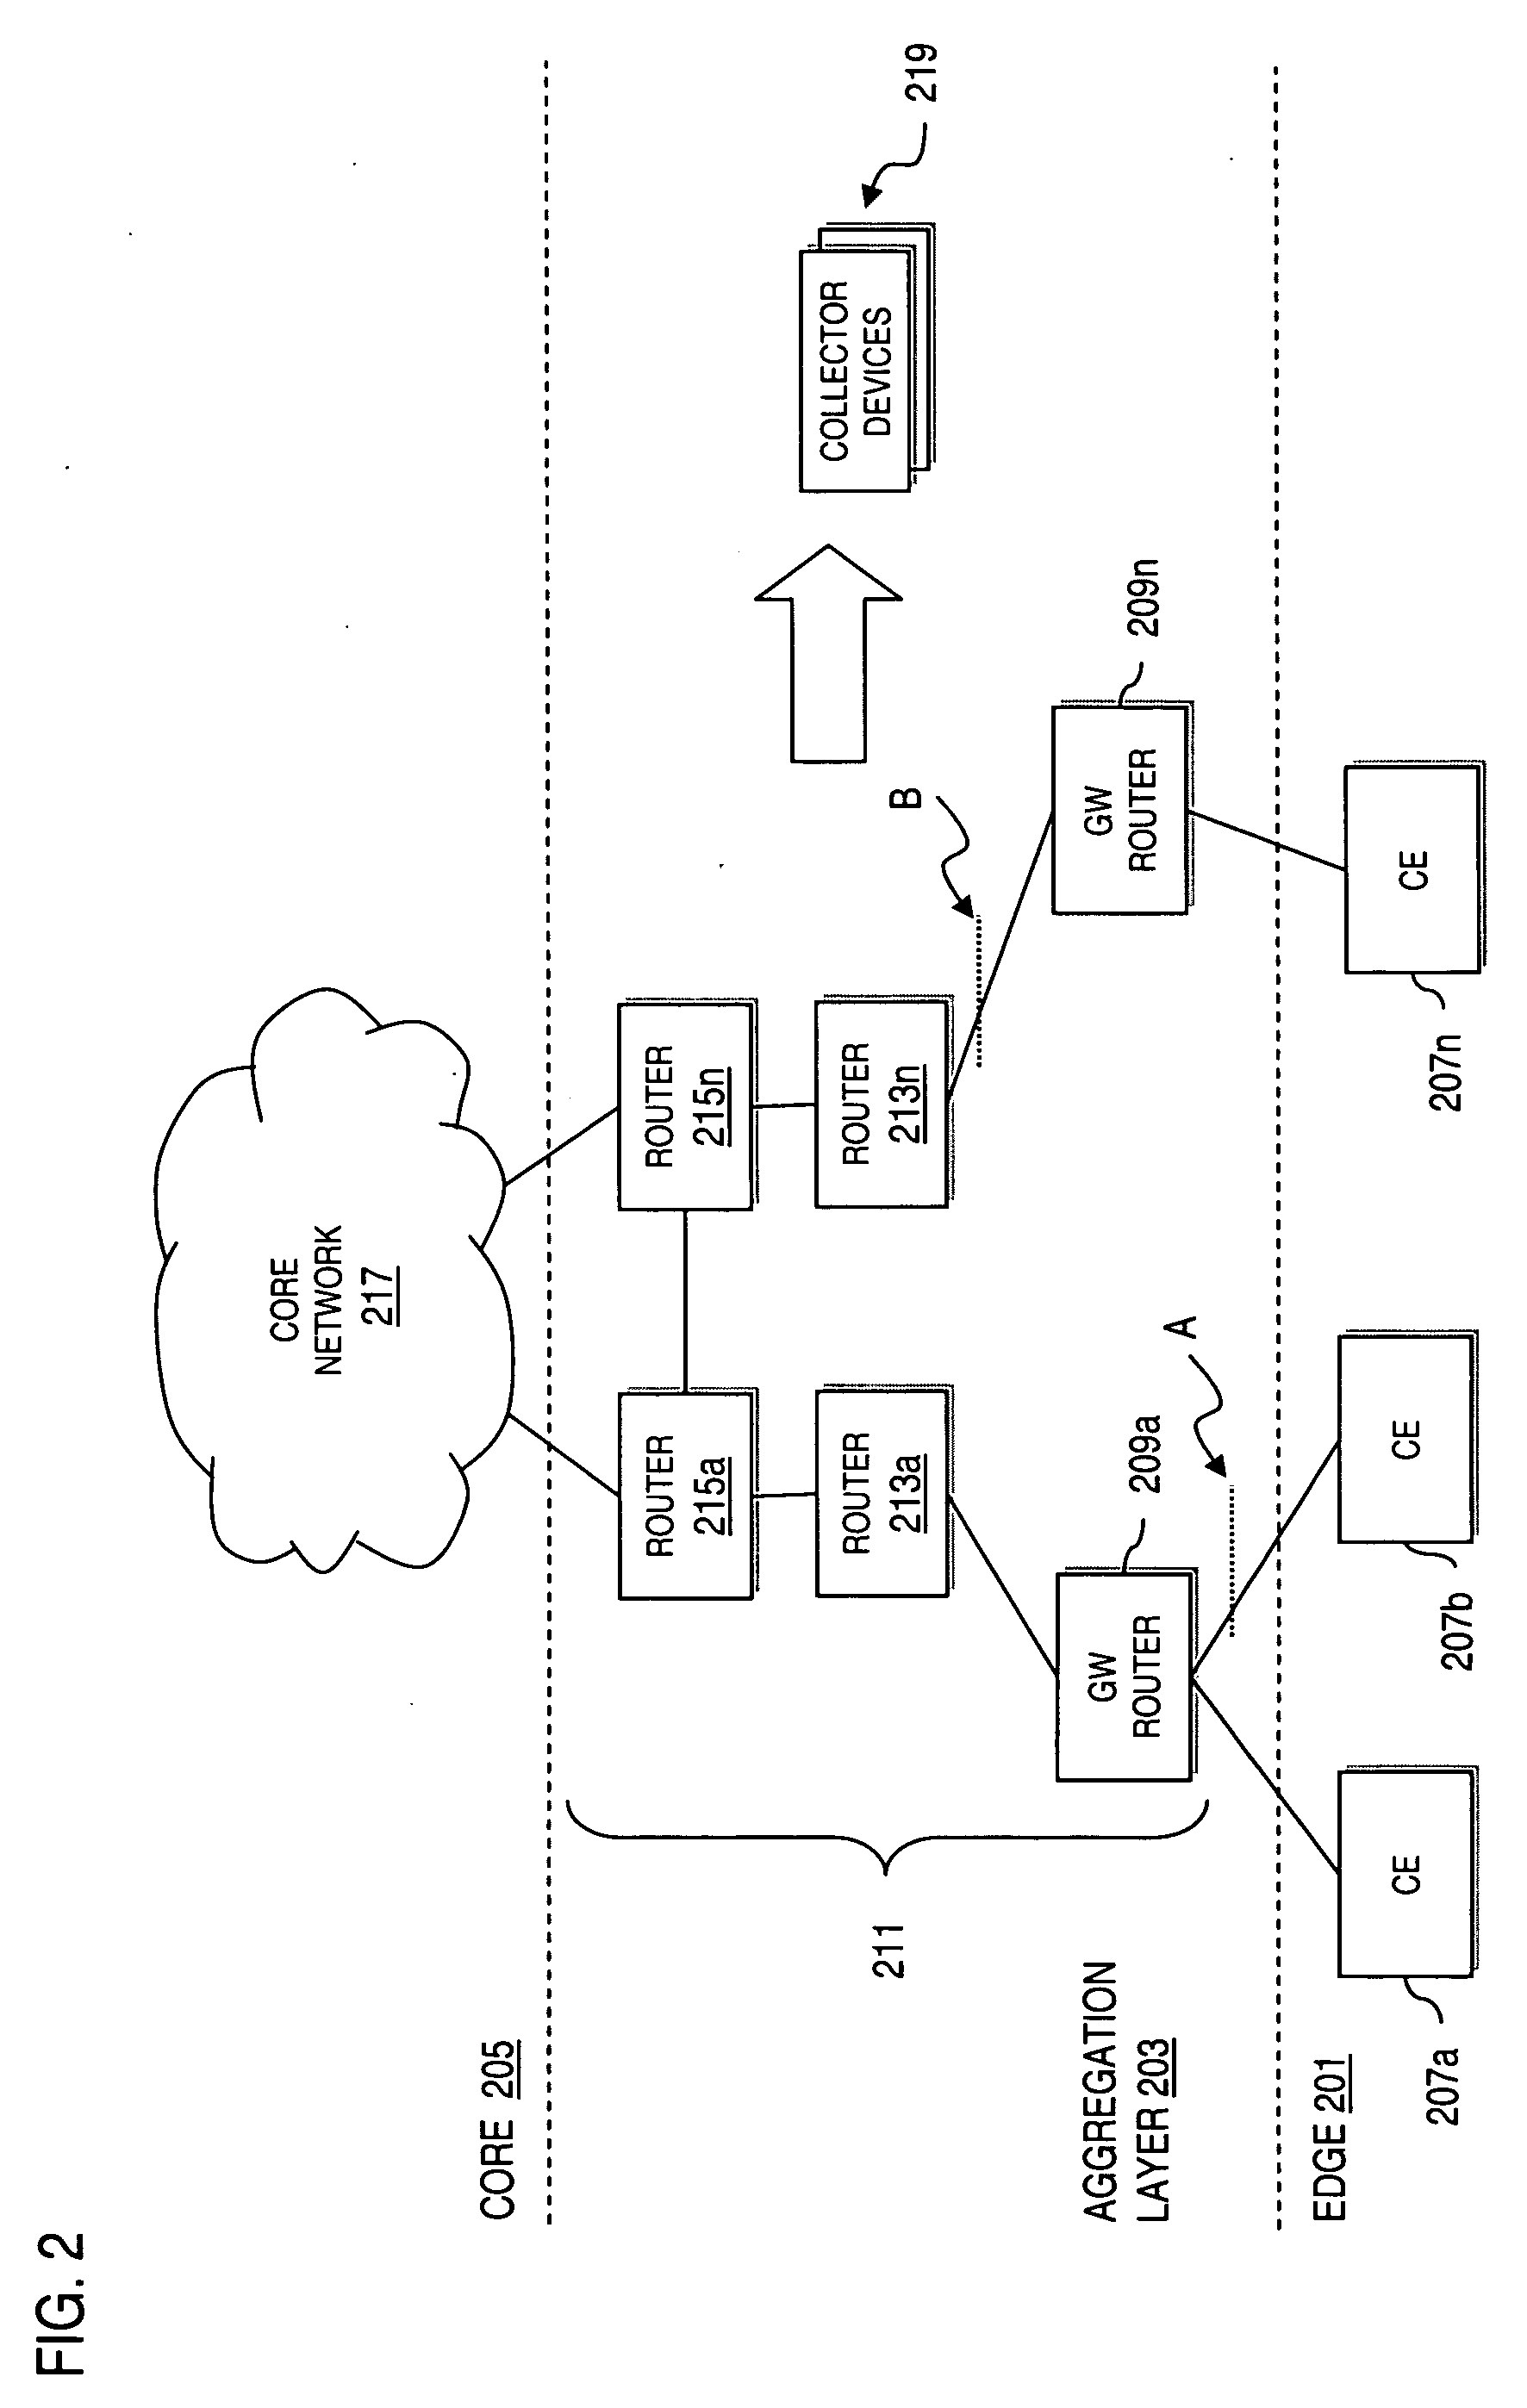 Method and apparatus for detecting denial of service attacks